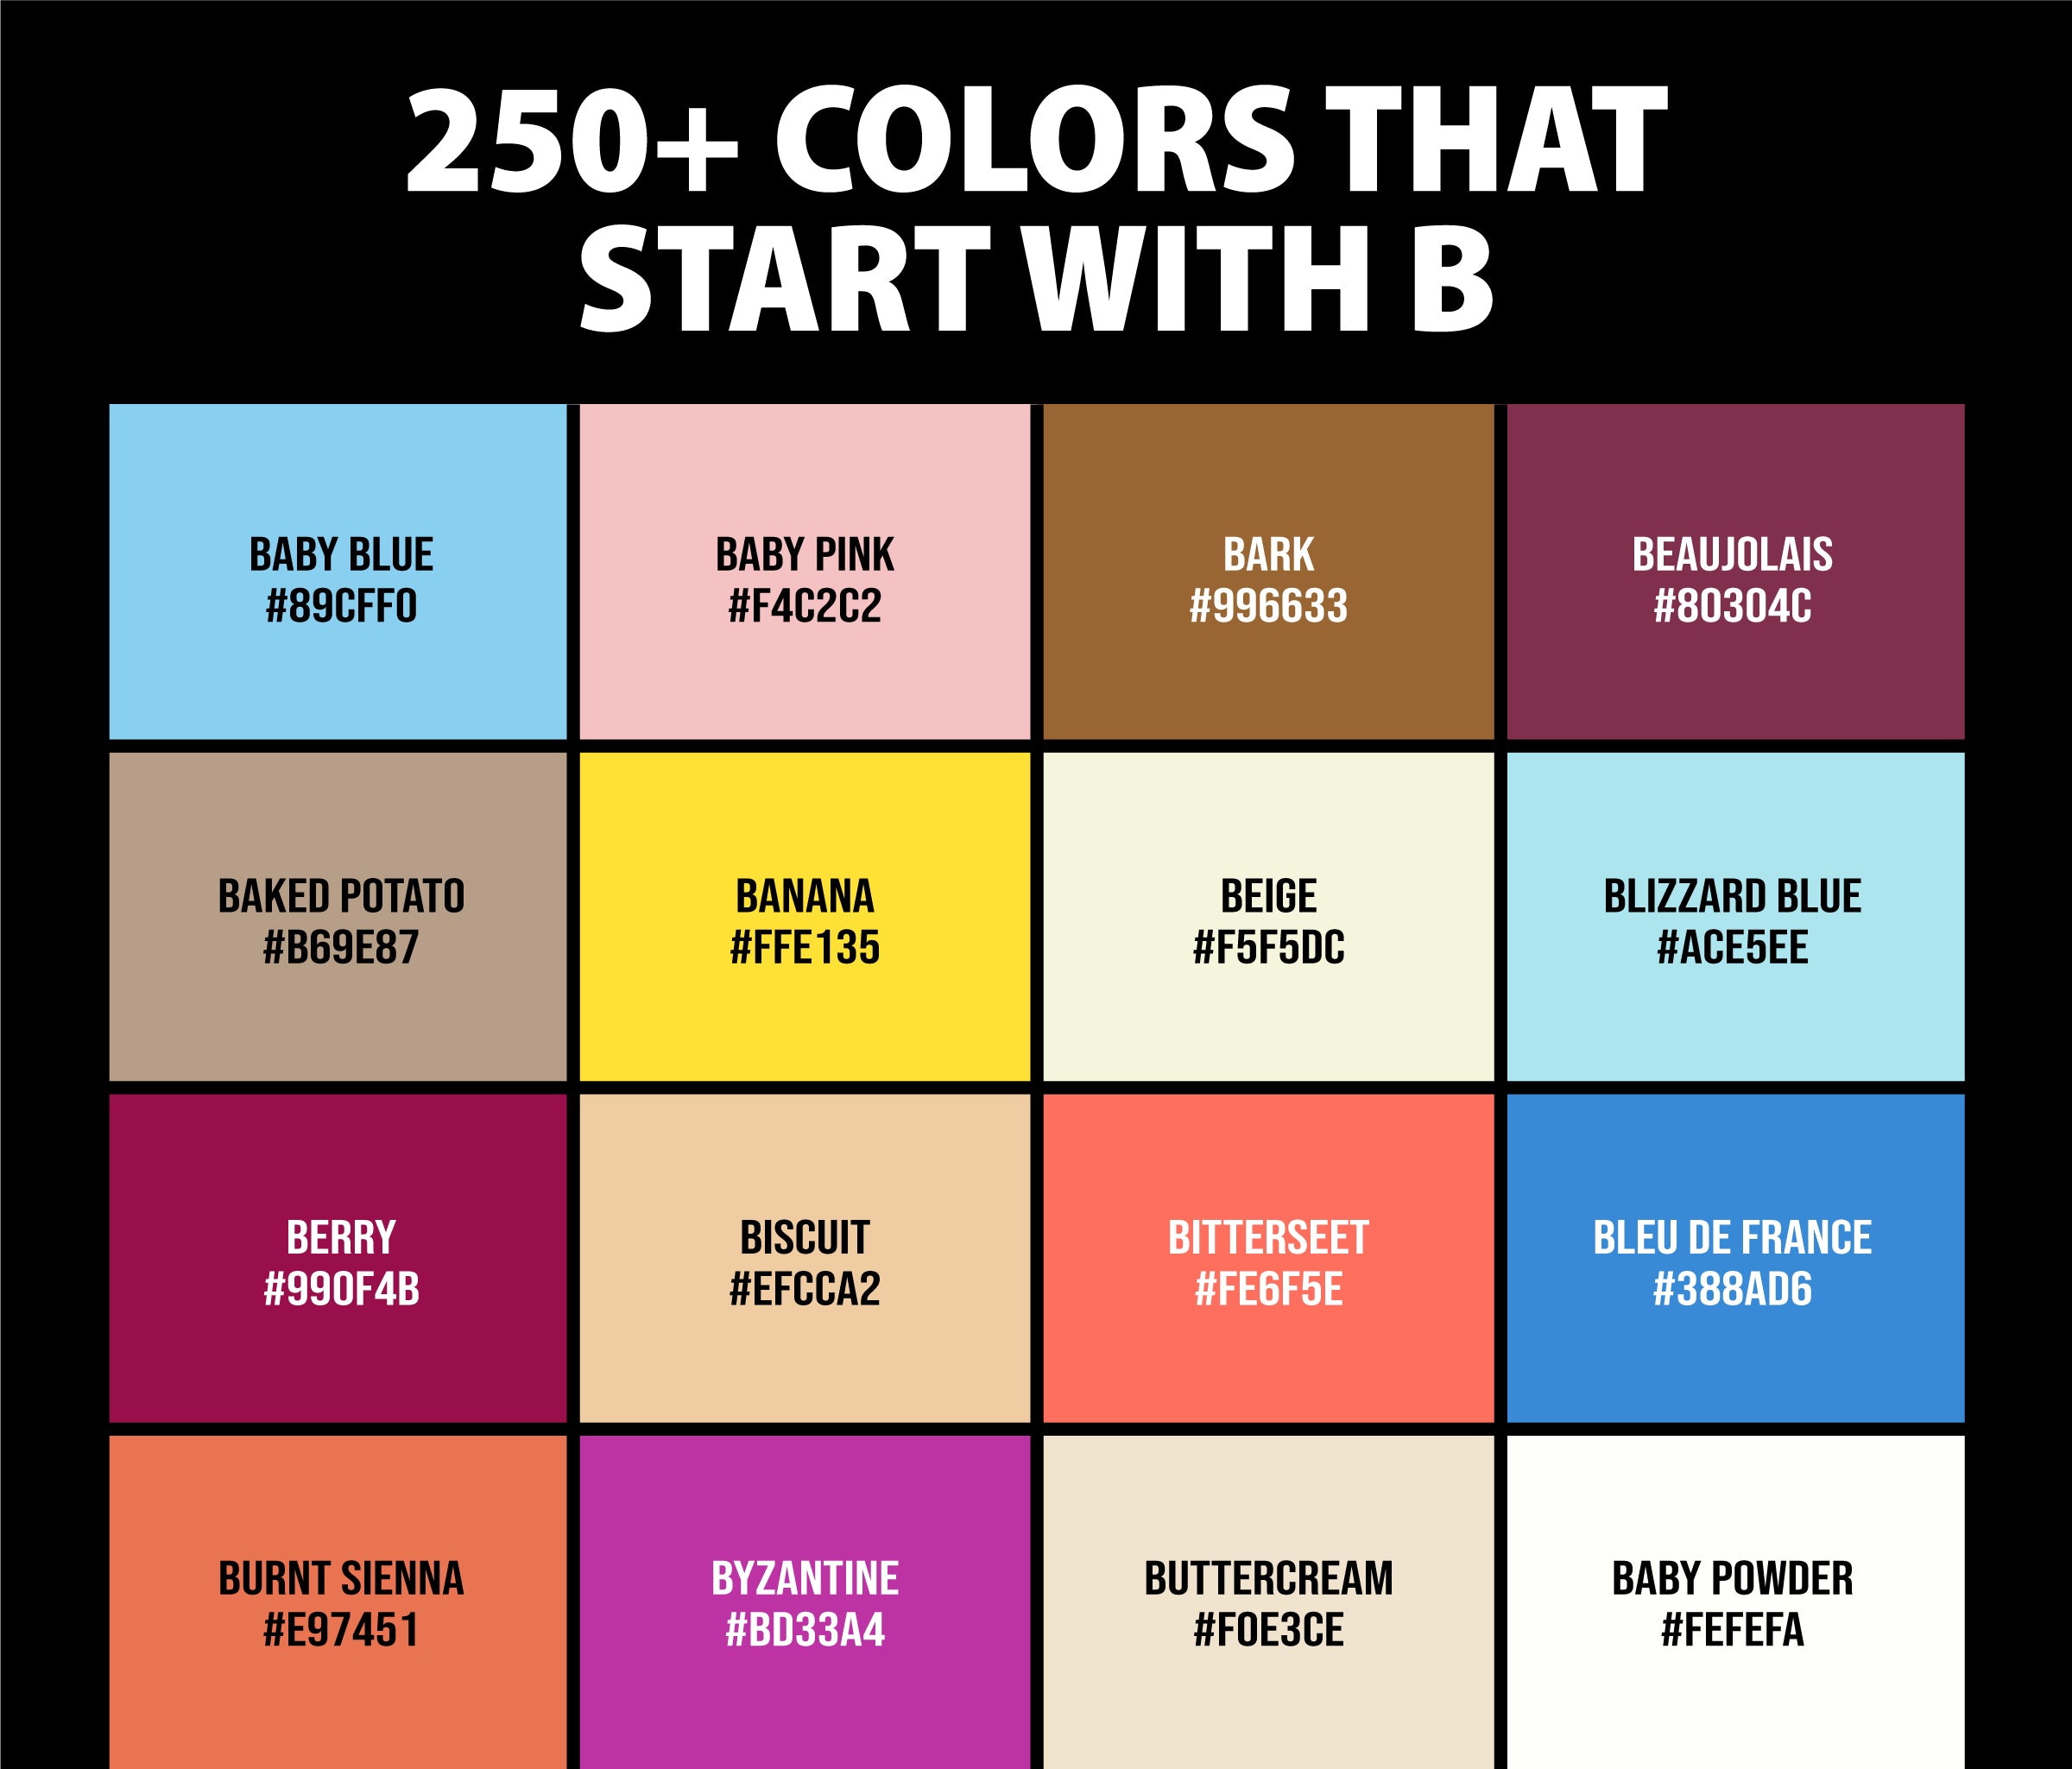 Brass Color Code is #b5a642